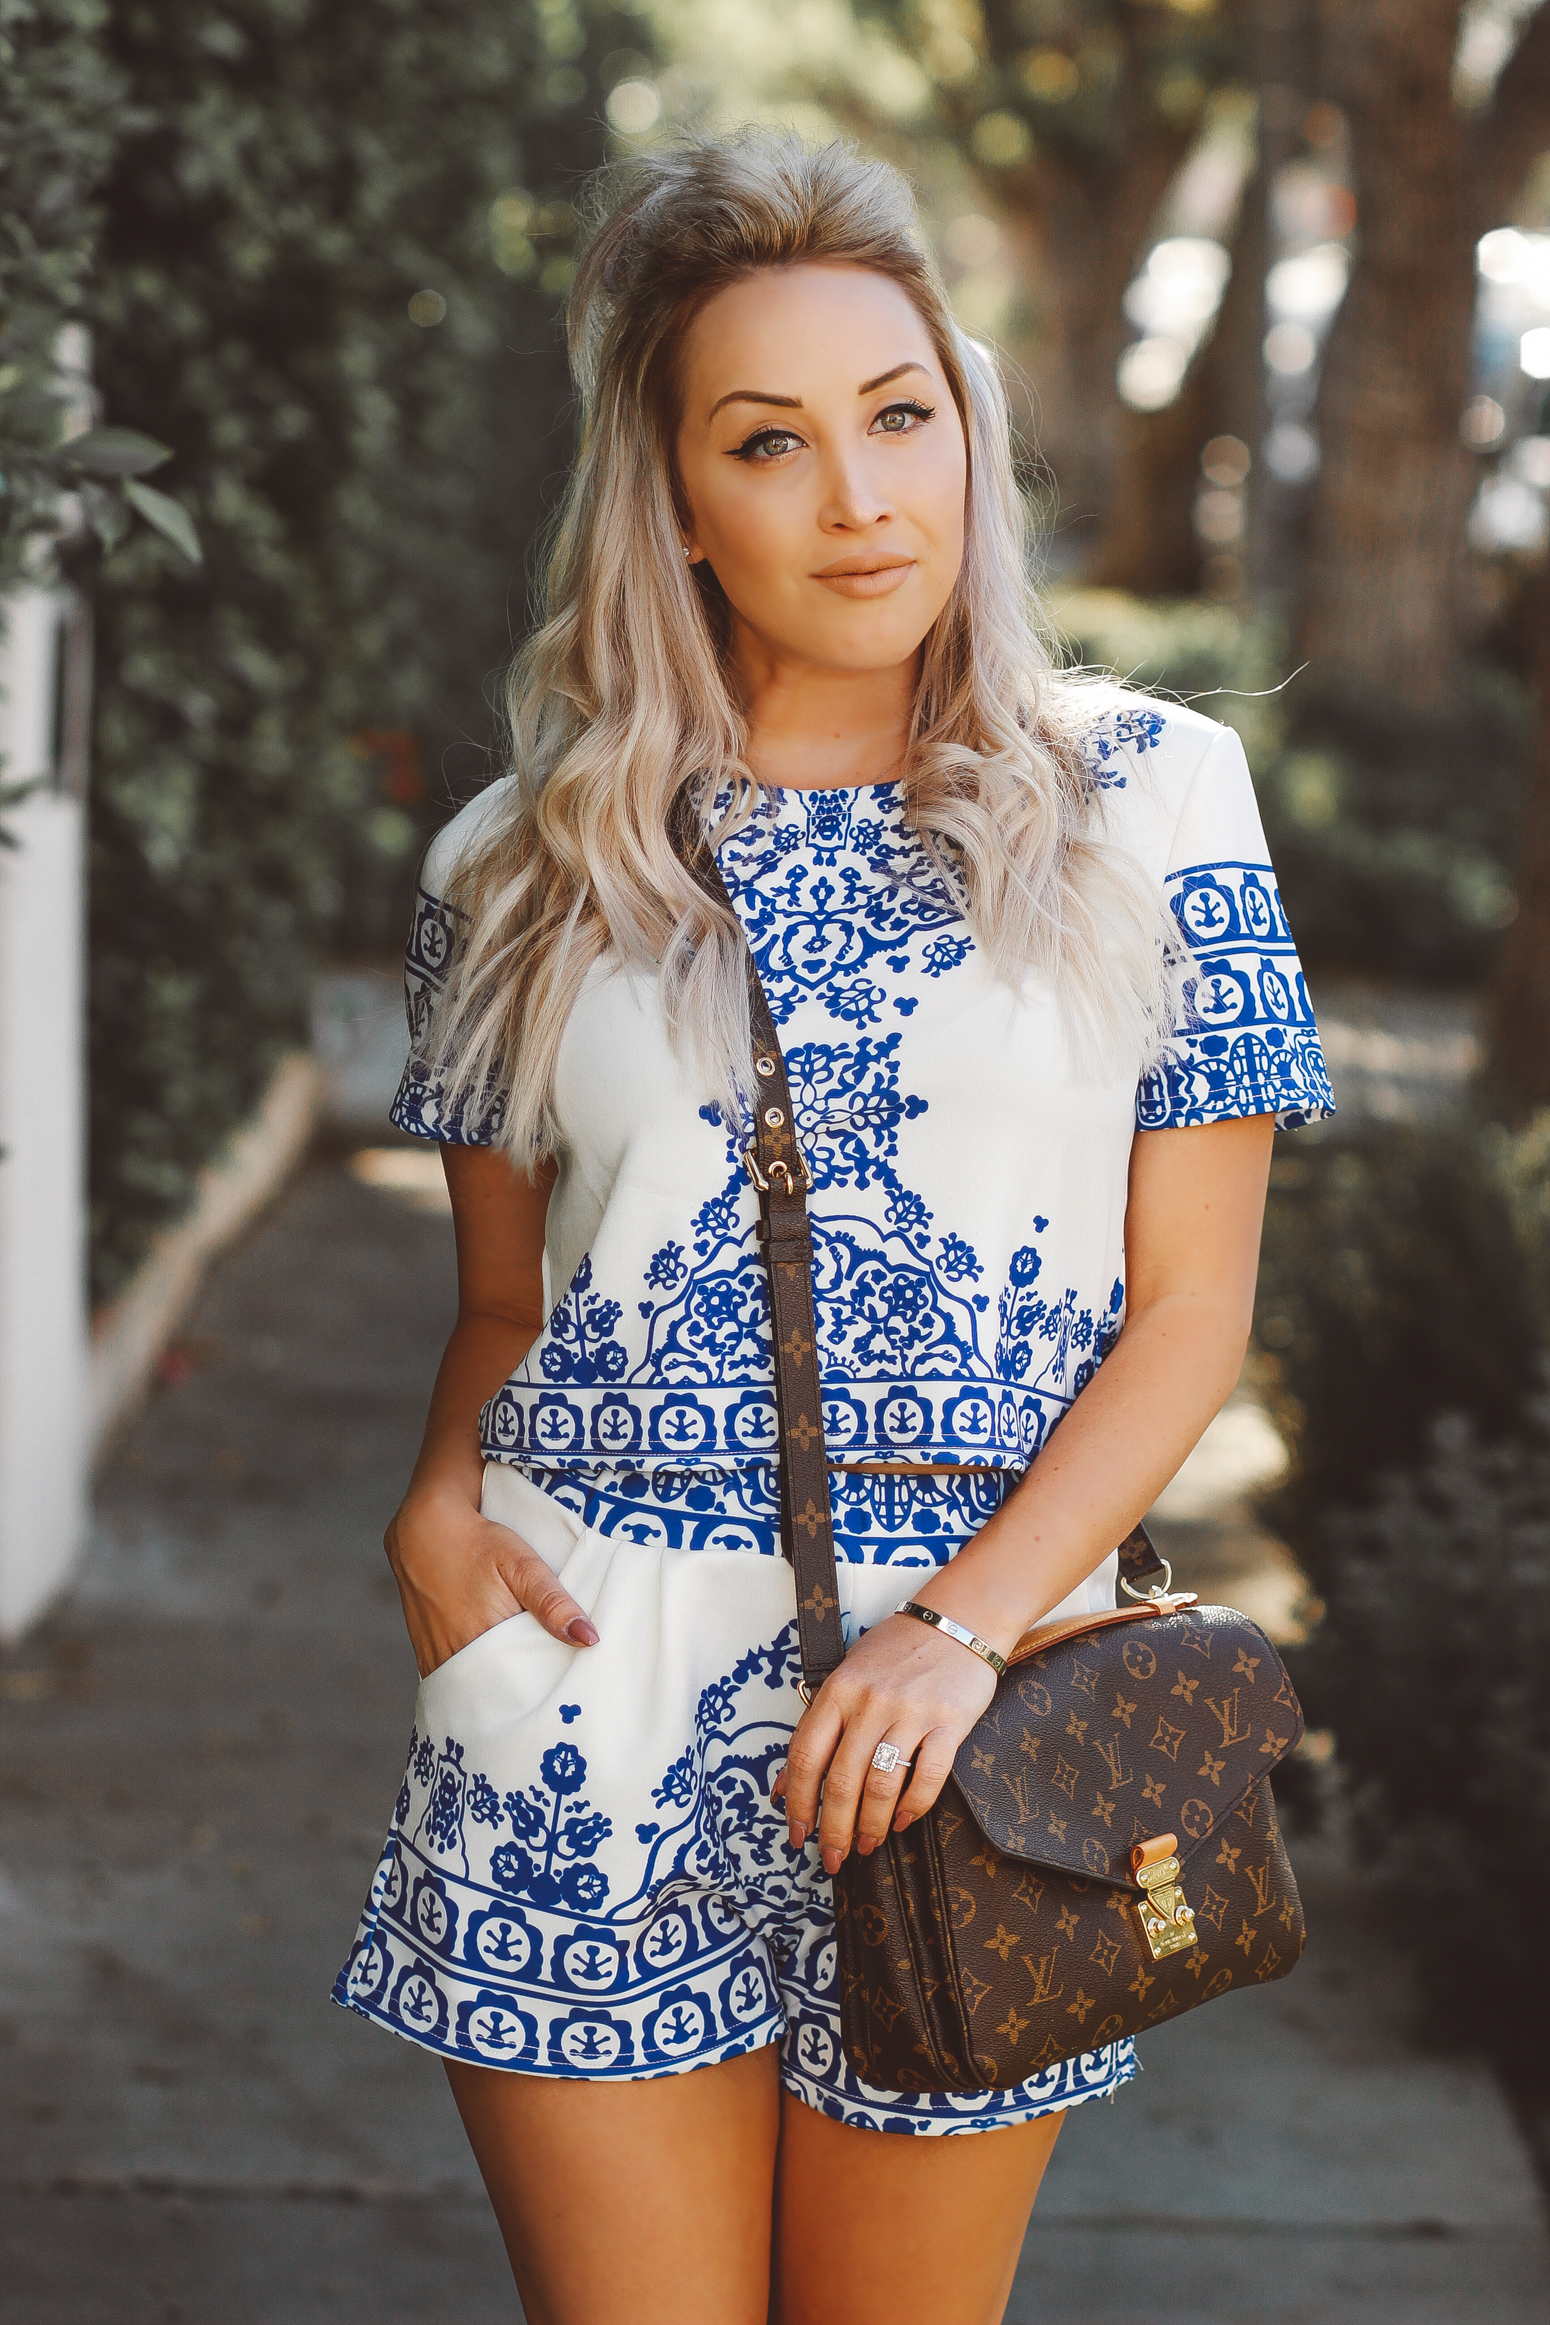 Blondie in the City  |  Porcelain Print Two-Piece Outfit  |  Louis Vuitton Pochette Metis